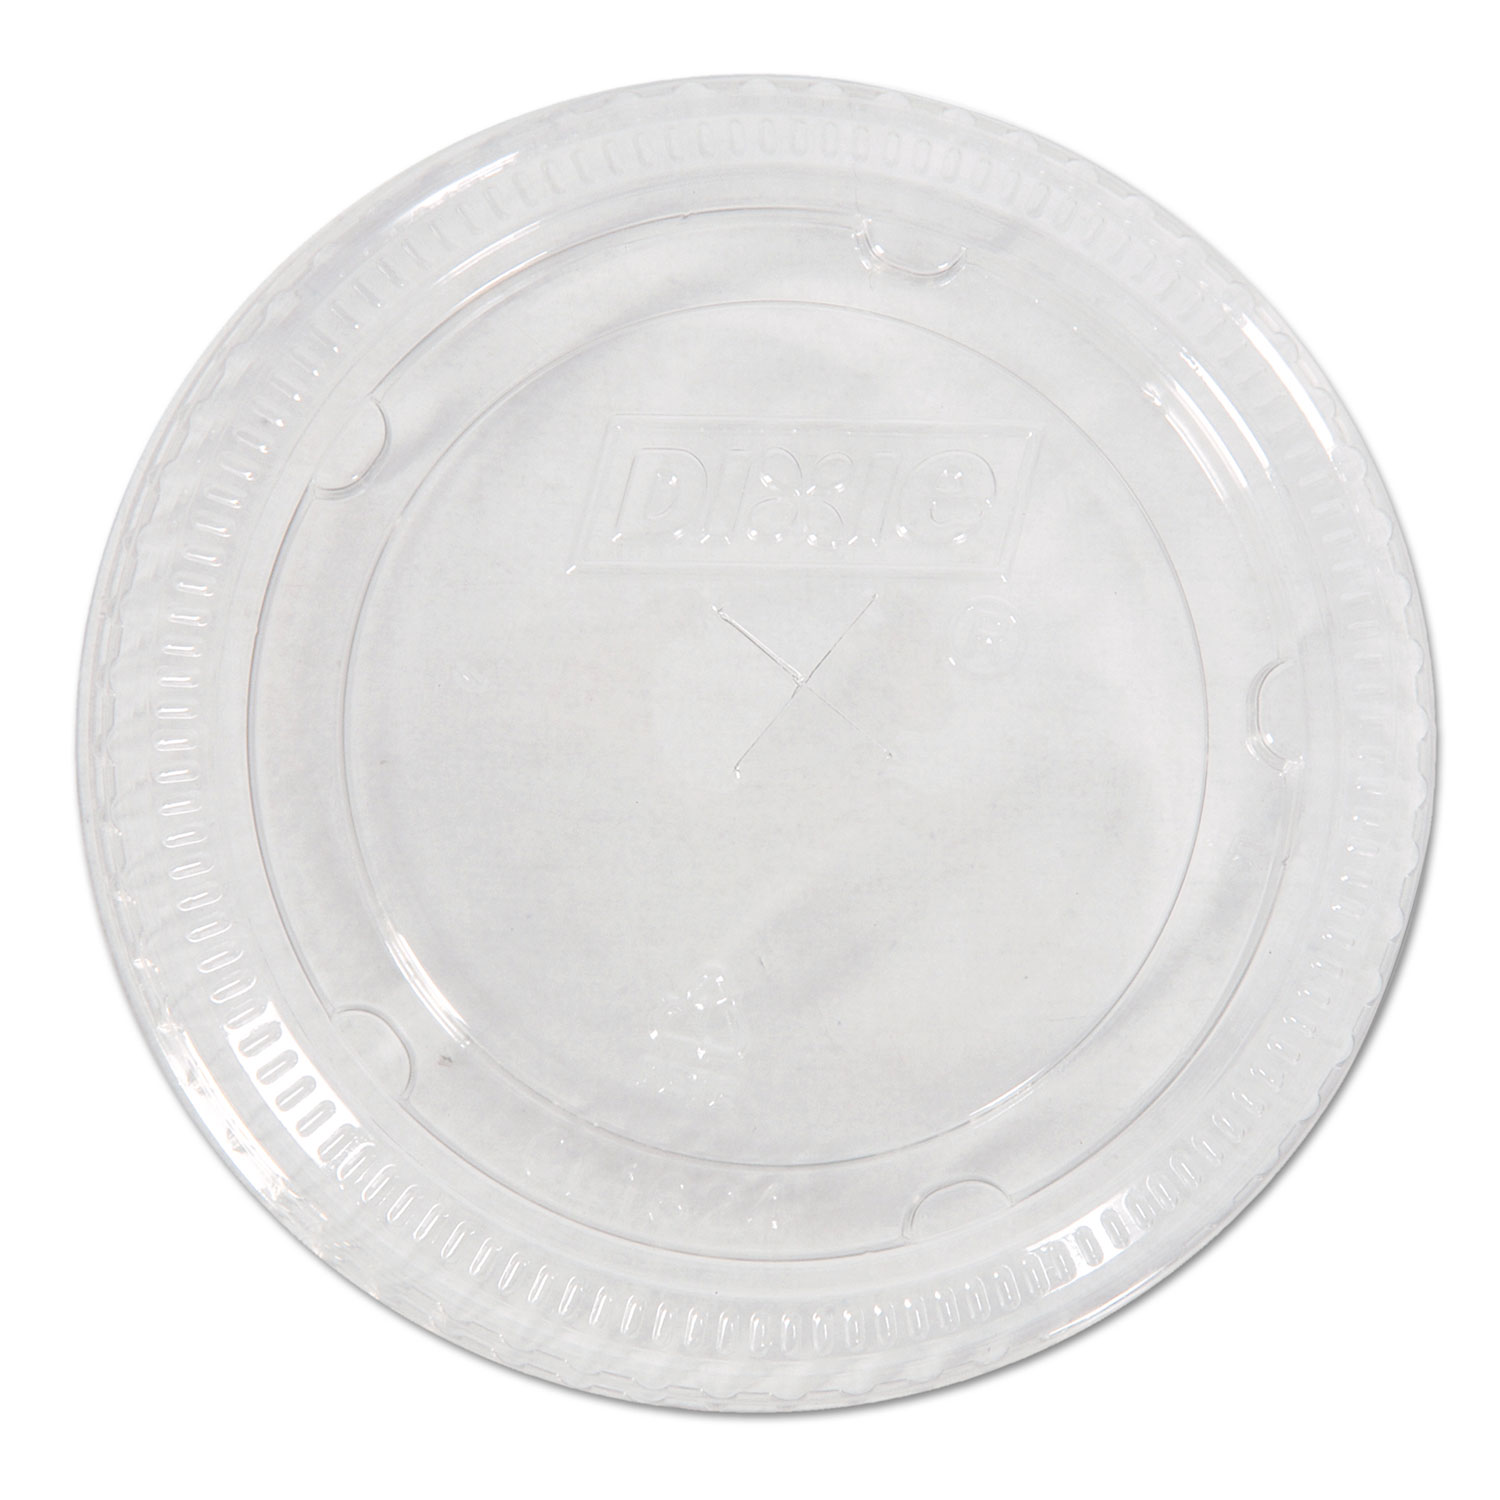  Dixie CL1624 Cold Drink Cup Lids, Fits 16-24 oz Plastic Cold Cups, Clear,100/Pack, 10 Packs/Carton (DXECL1624) 